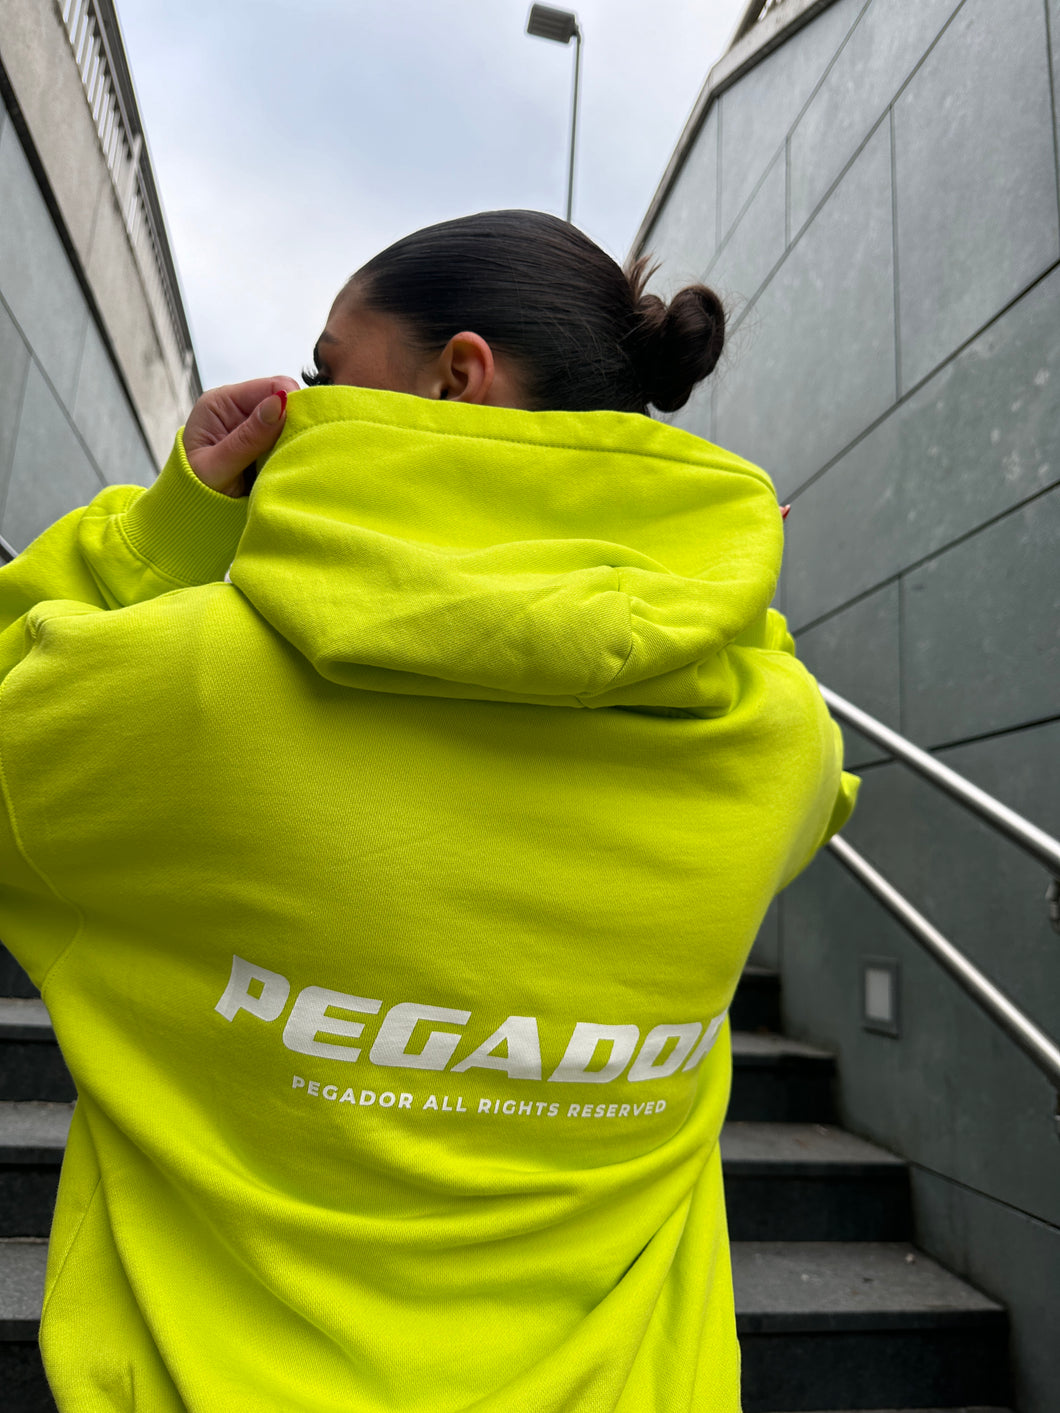 PEGADOR ATNA LOGO OVERSIZED HOODIE WASHED LIME YELLOW